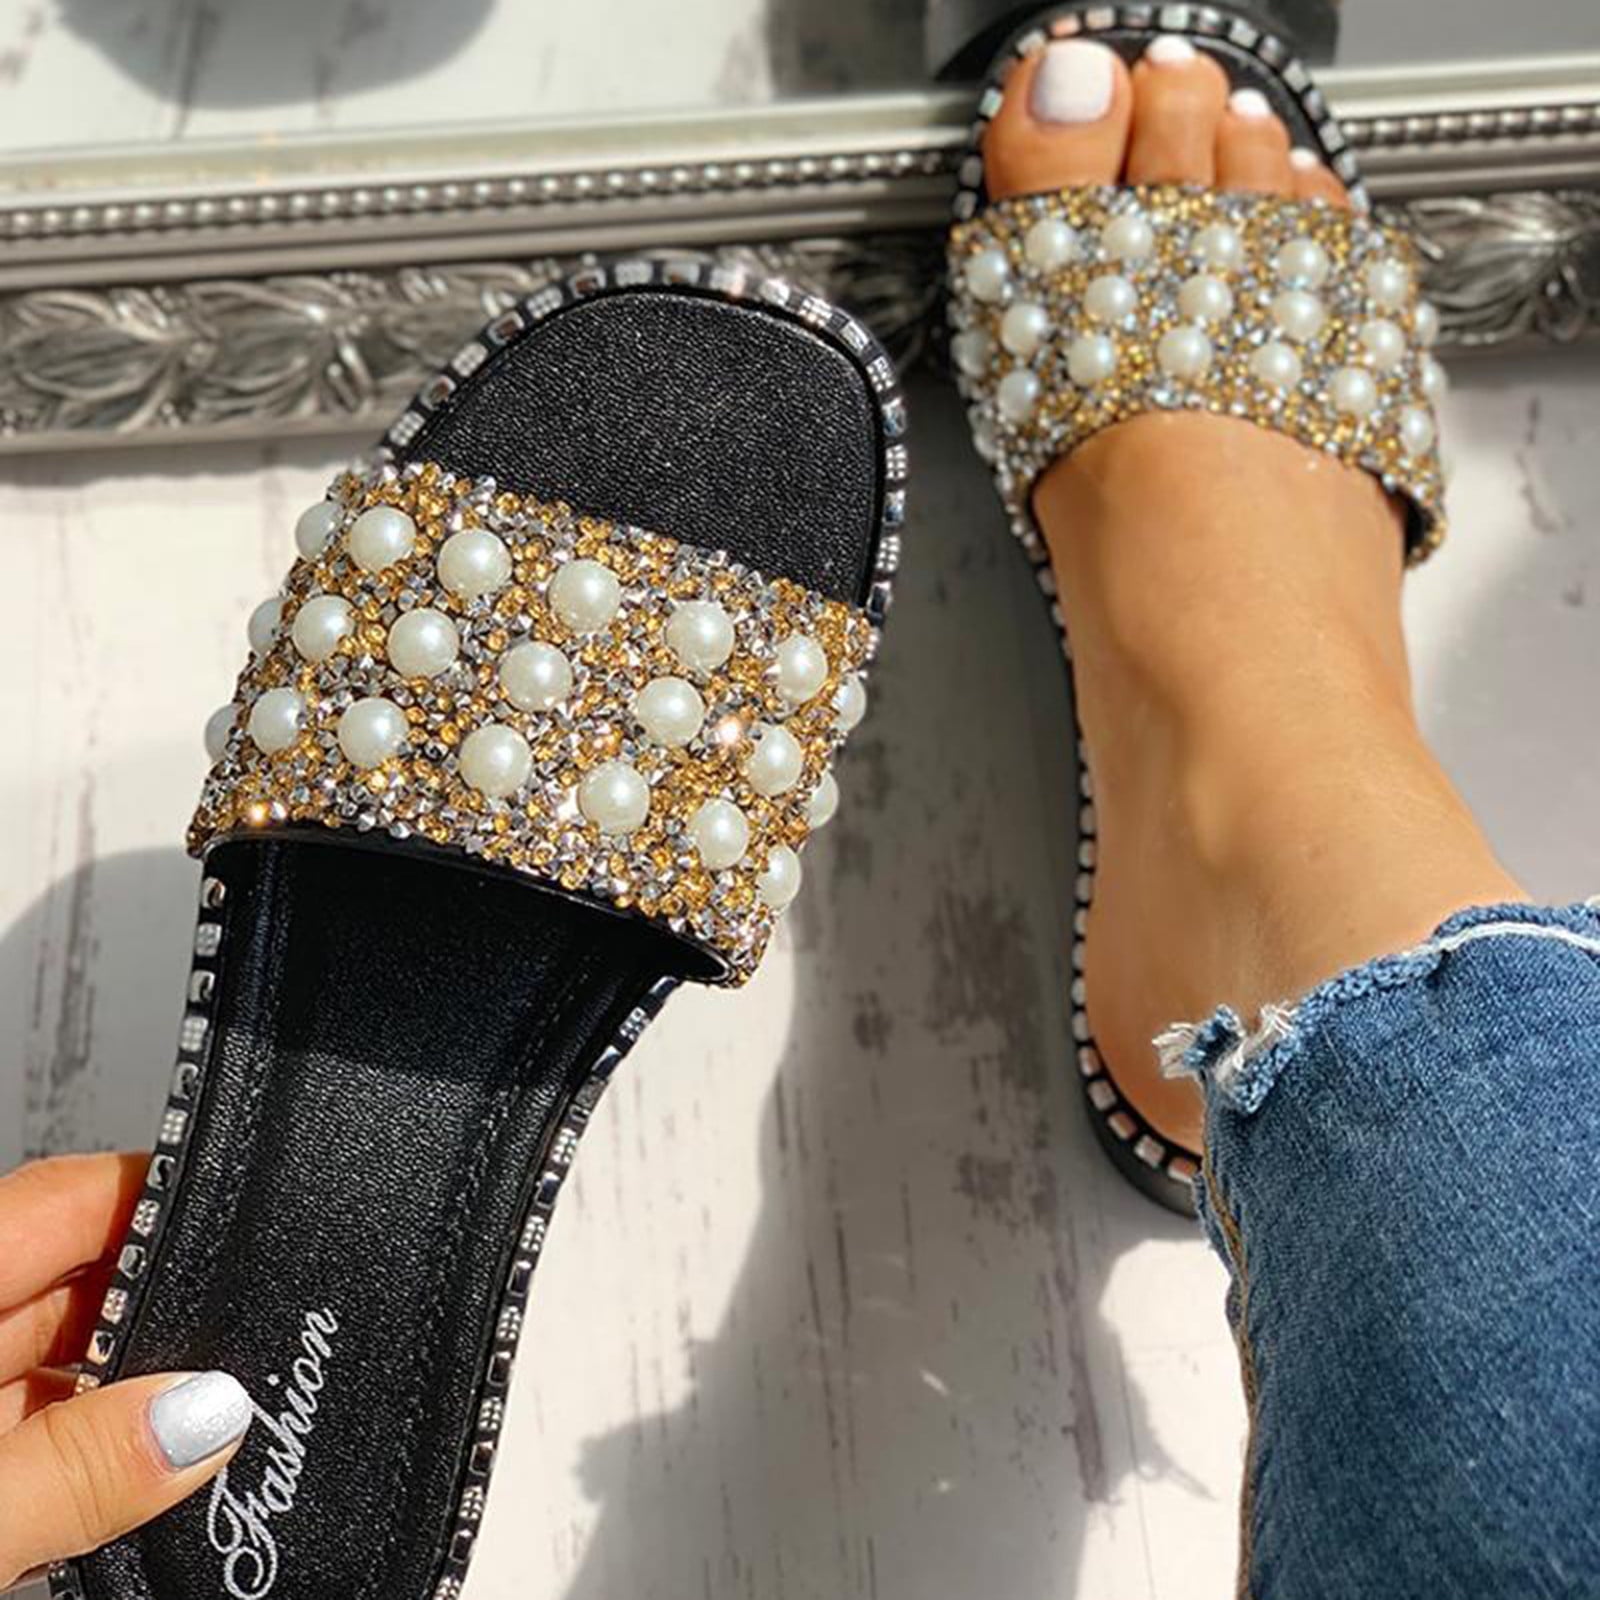 Private space Summer Women Shoes Women Sandals Rhinestone Pearl Flip Flops New Flat Sandals Soft Bottom Ladies Shoes